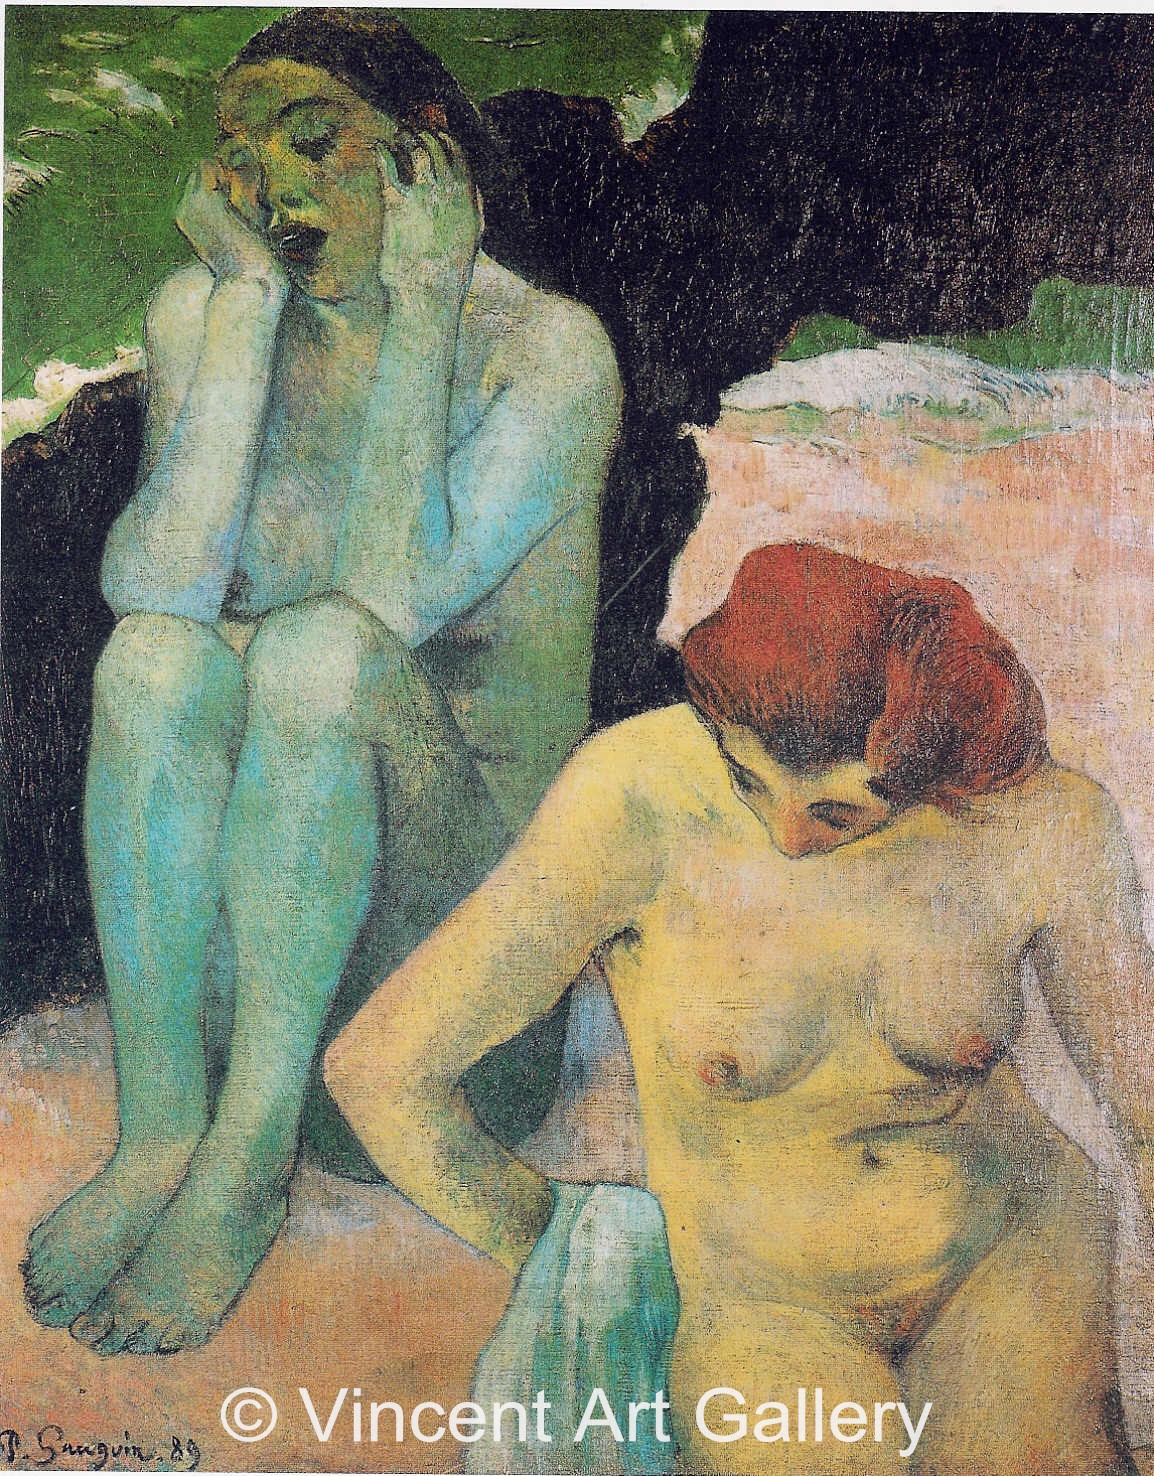 A3620, GAUGUIN, Woman Bathing, Life and Death, 1889